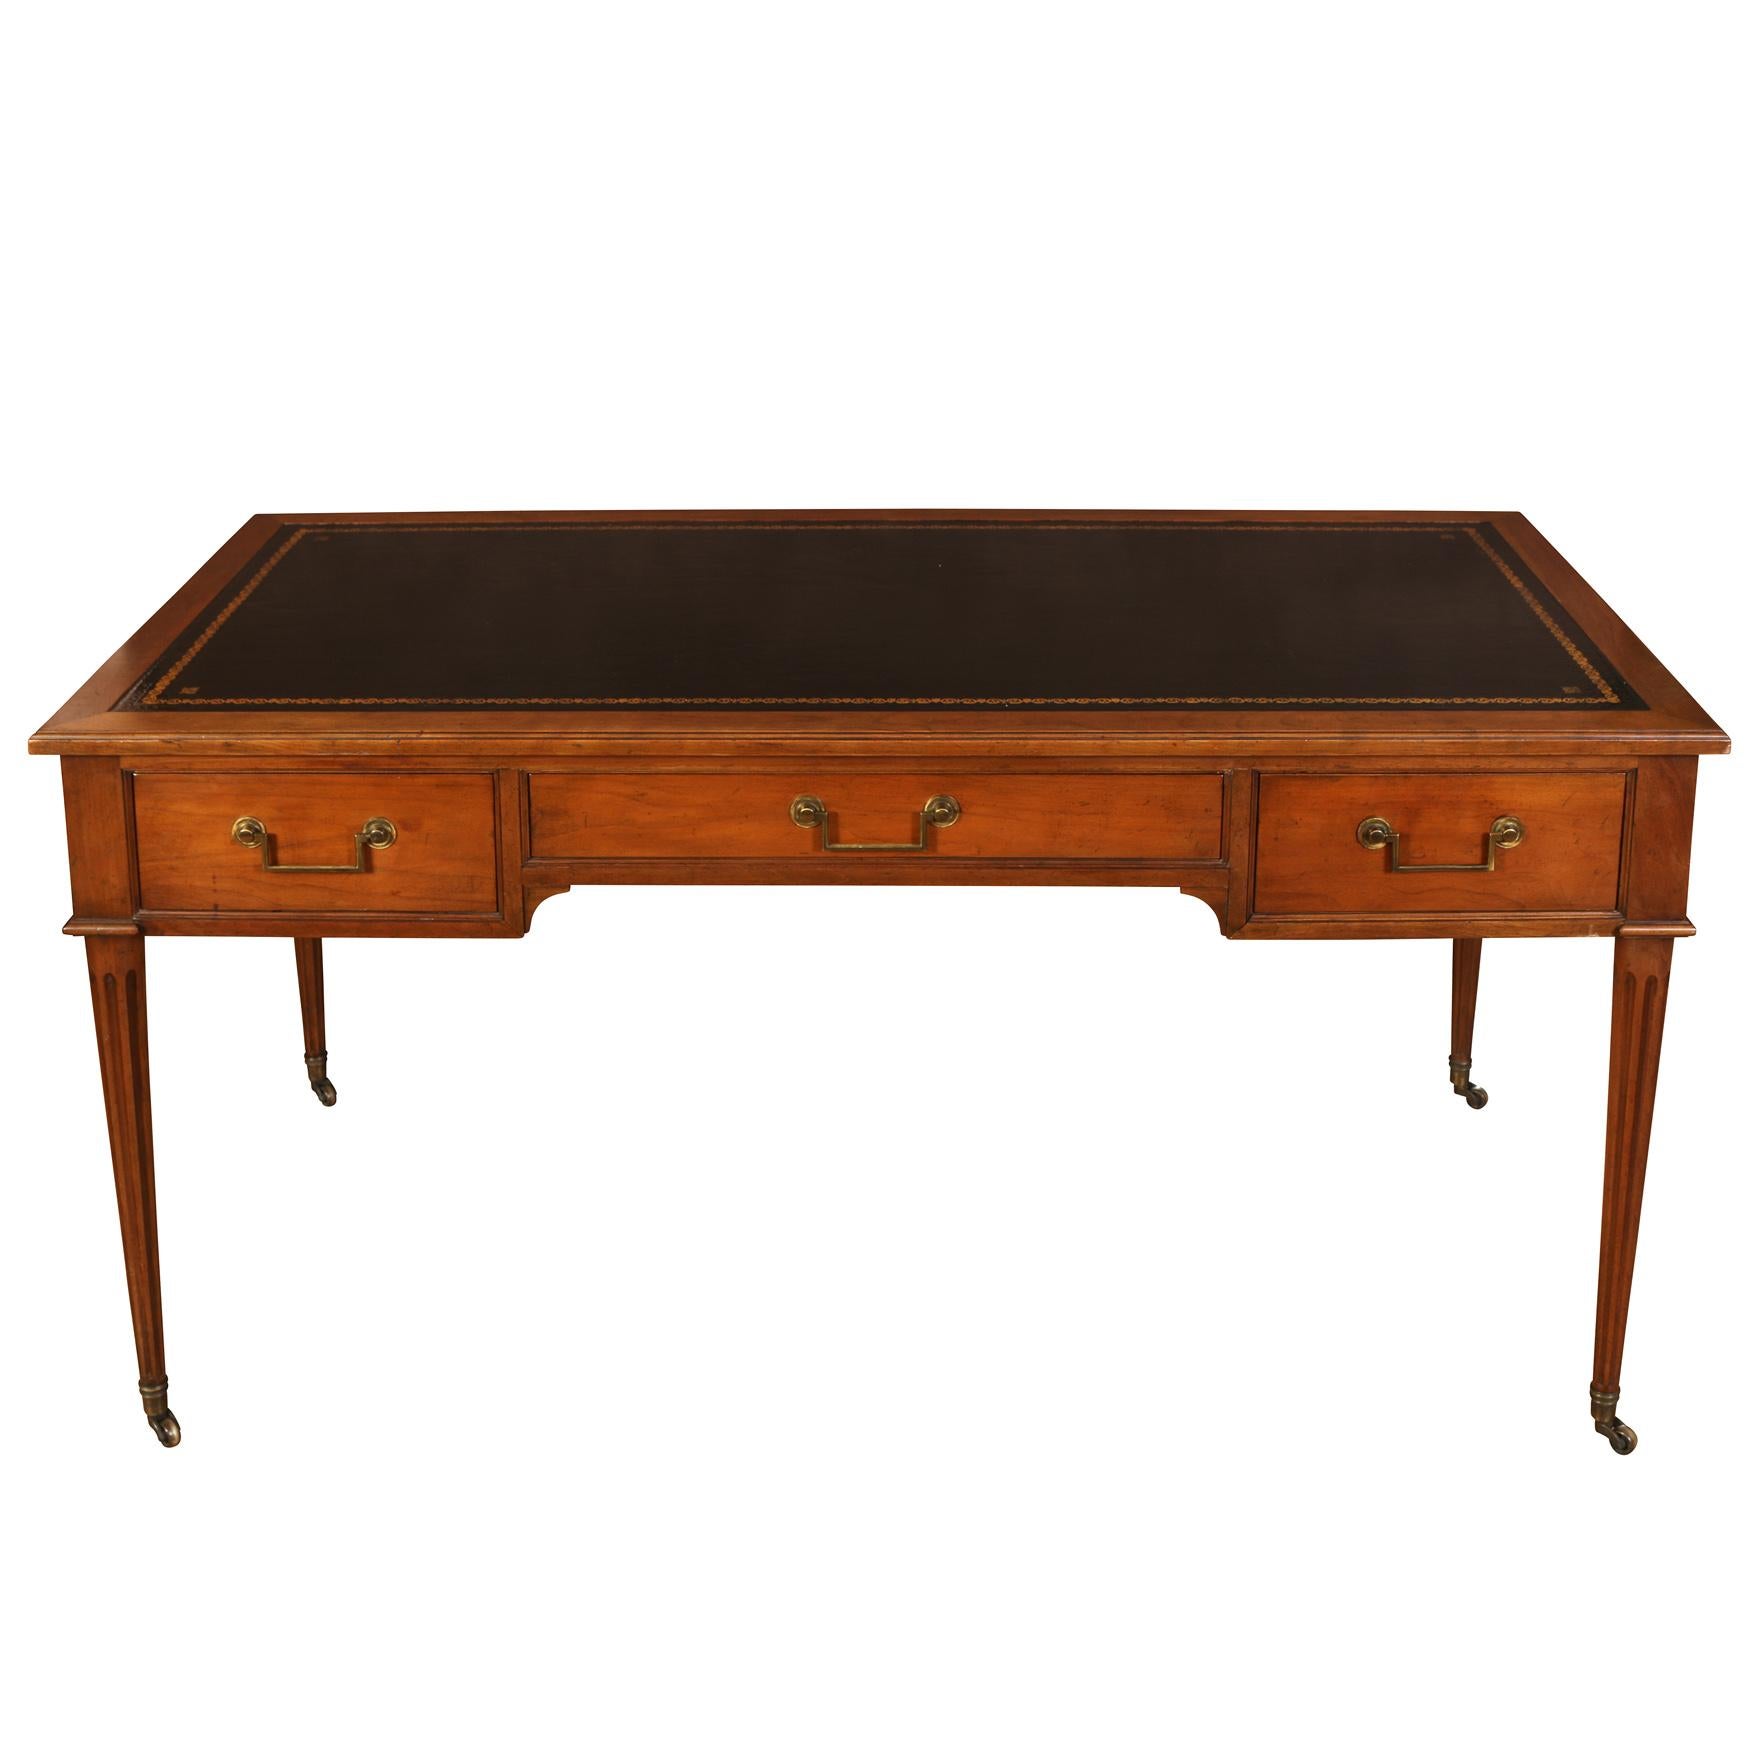 A very nice looking mahogany Louis XVI style bureau plat. The clean lines of the desk give it an understated elegance. Its rectangular top has an inset writing surface of black tooled leather and sits above three drawers with original brass pulls.